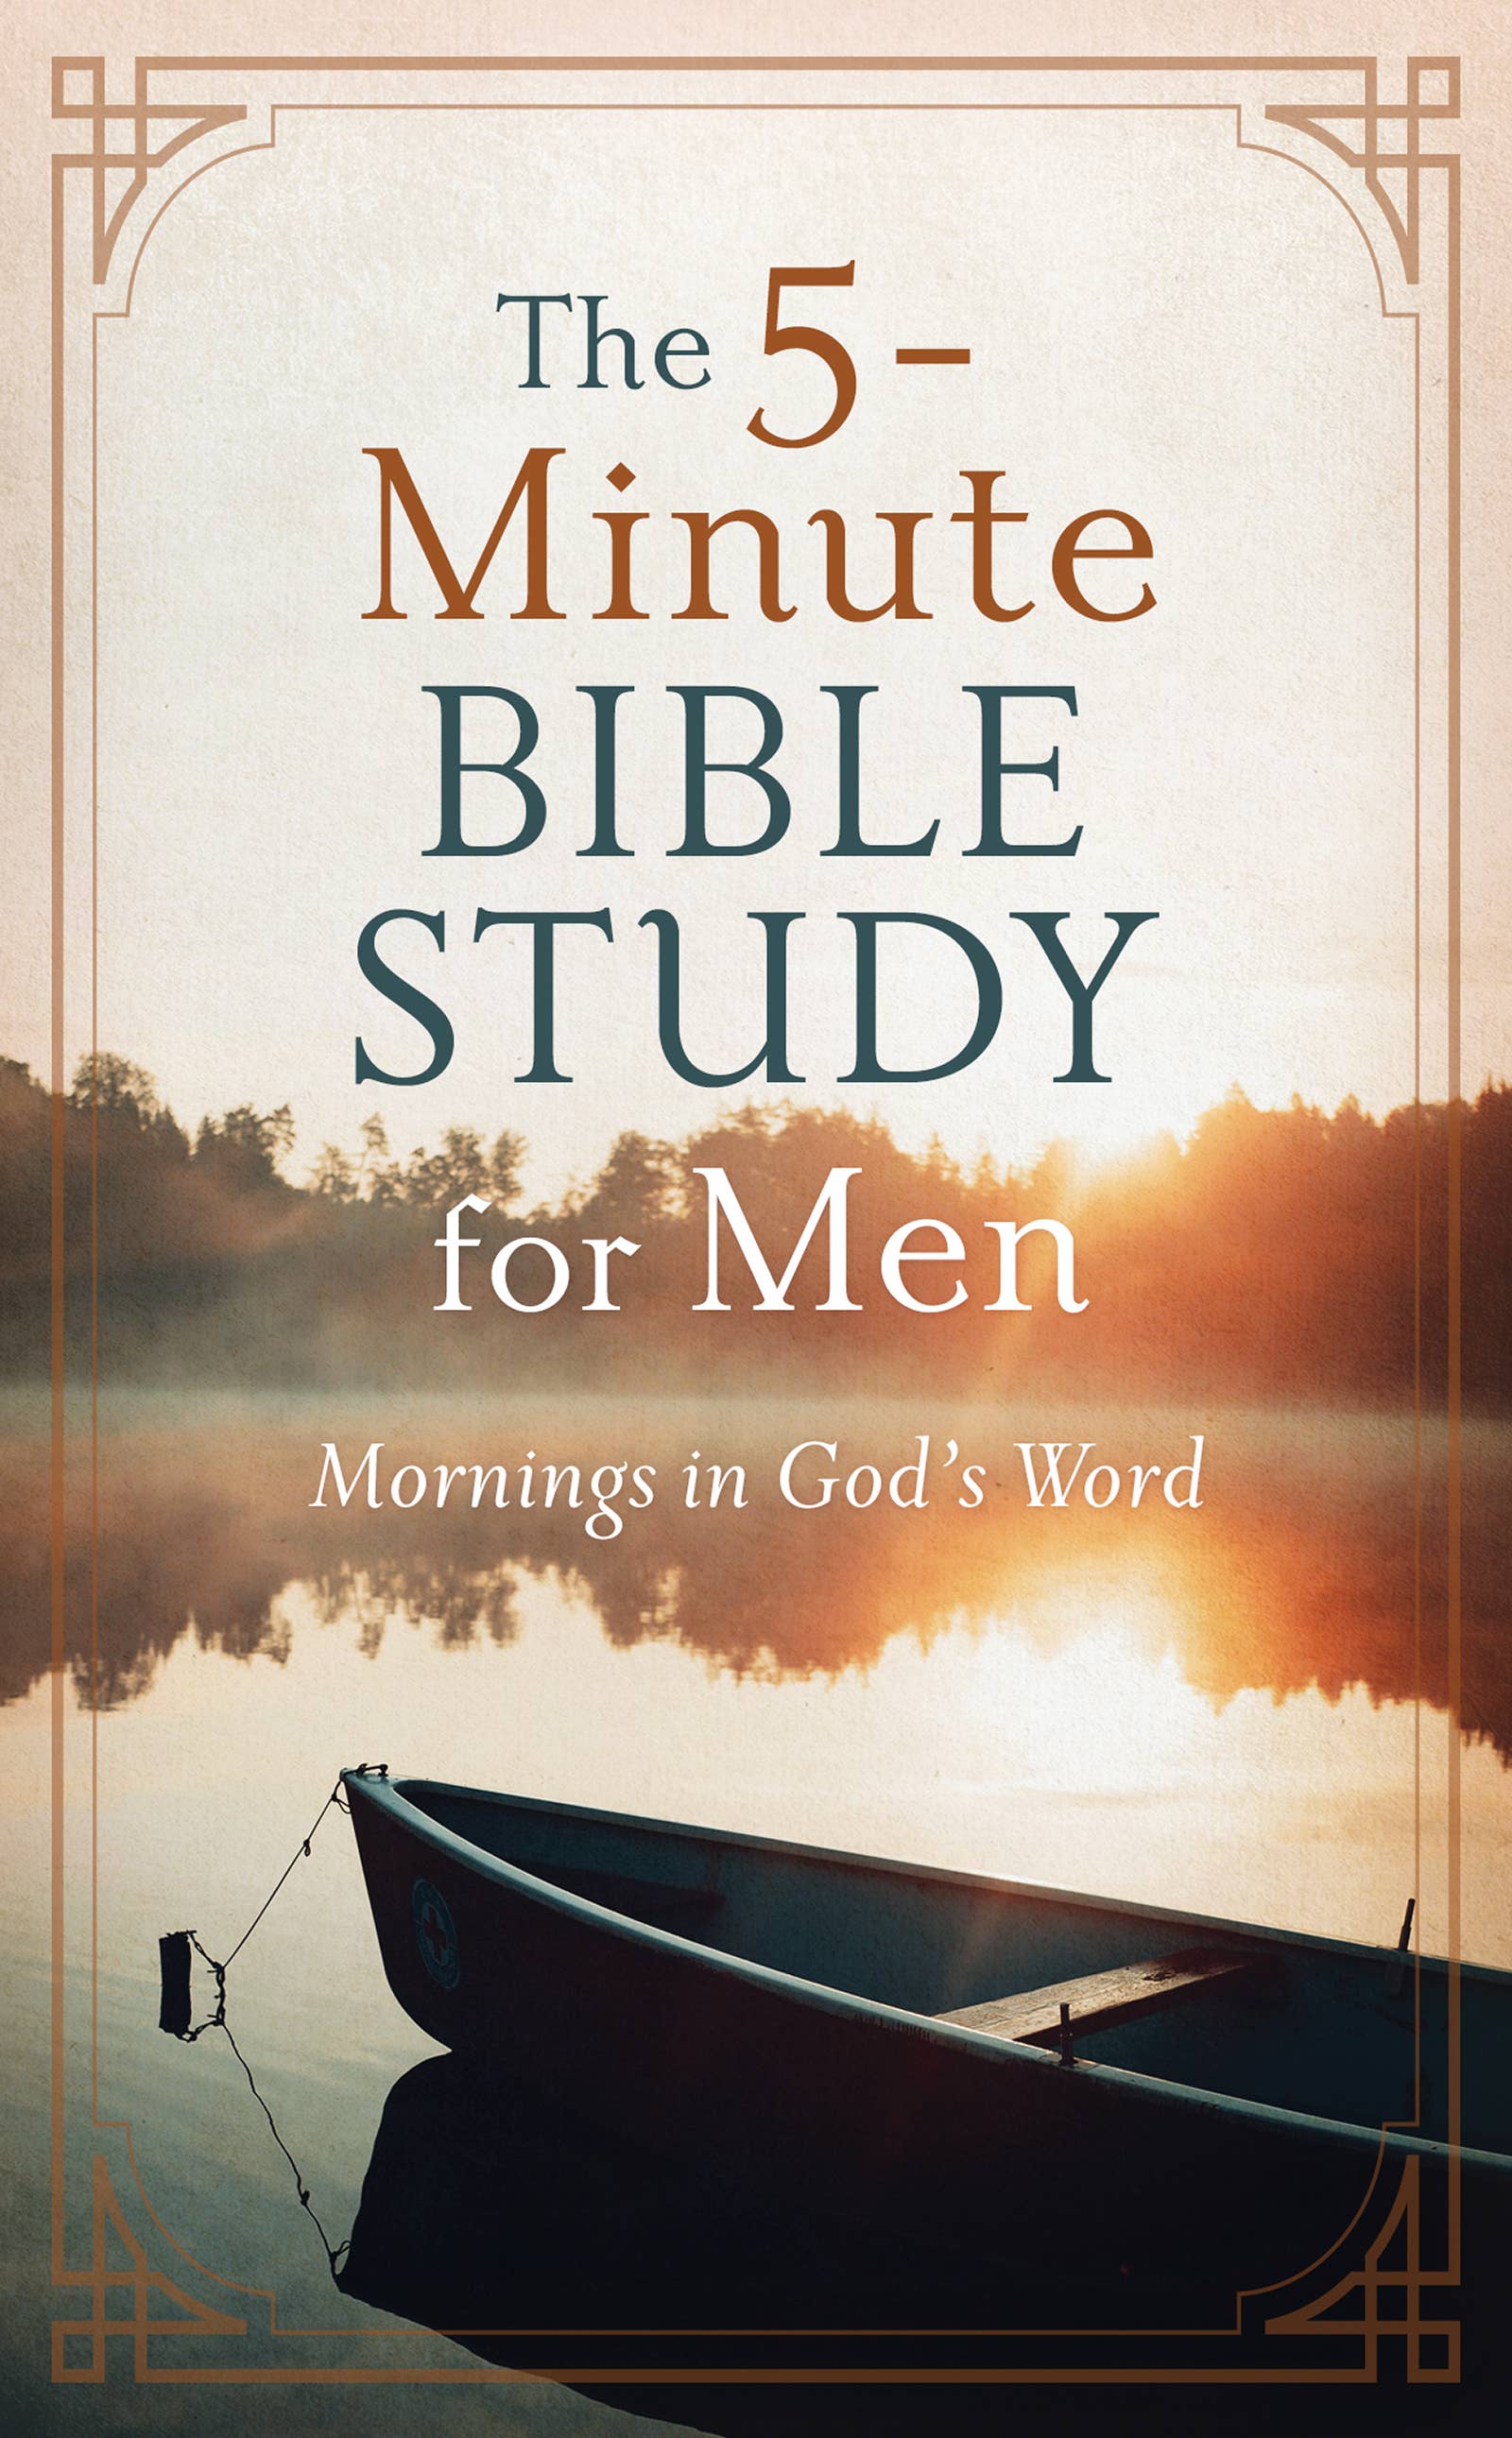 The 5-Minute Bible Study for Men: Mornings in God's Word